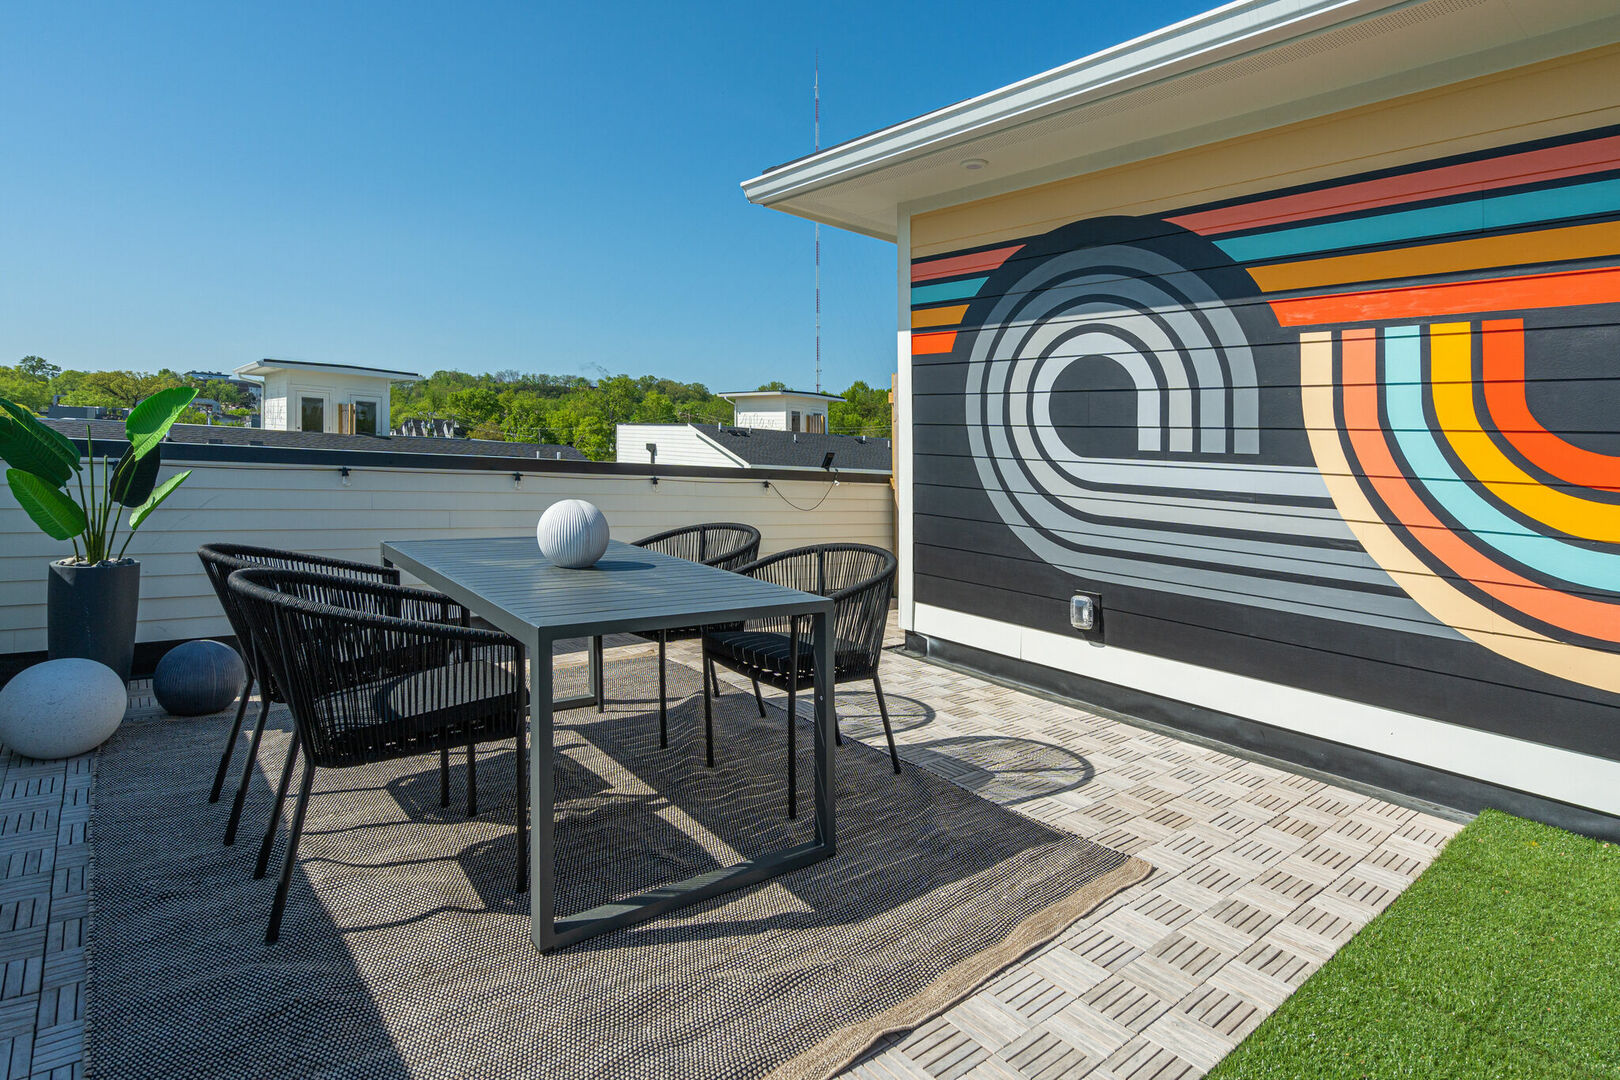 Private rooftop deck outdoor dining table (seats 4) and lounge area. Entire space is lined with bistro lights and includes a photo op mural!